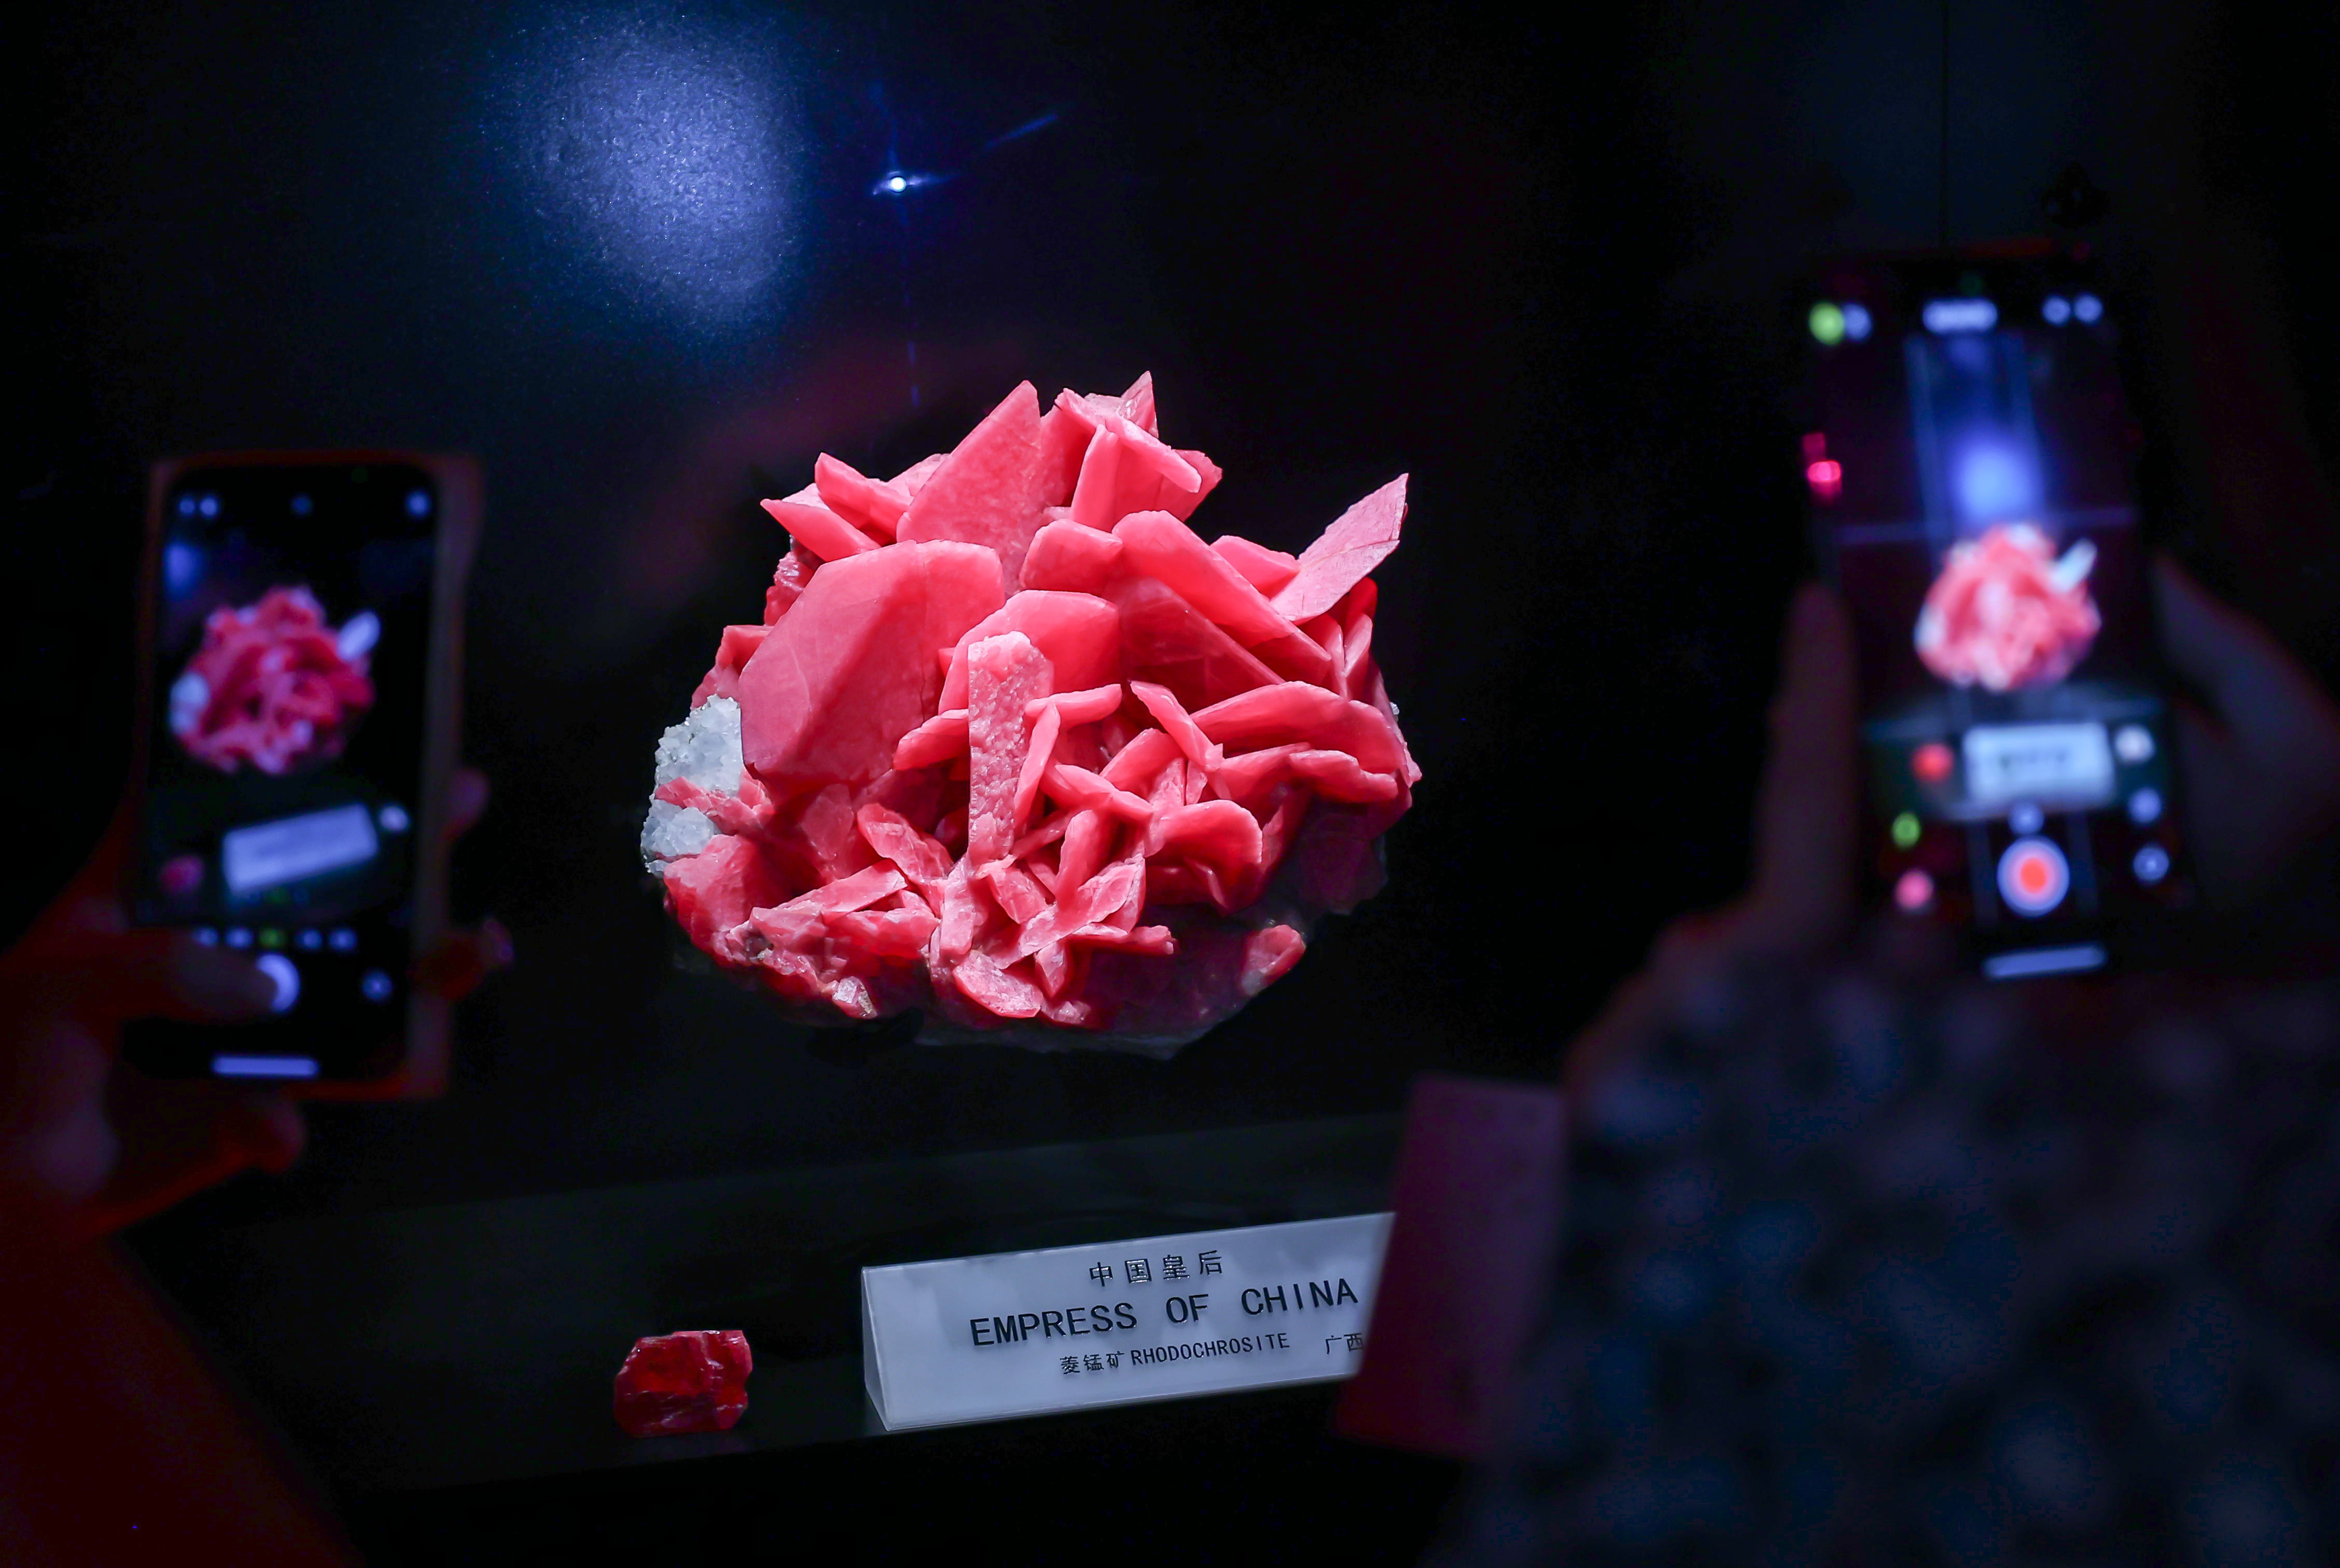 A rhodochrosite sample named Empress of China is shaped as a blooming rose. /CNSPHOTO